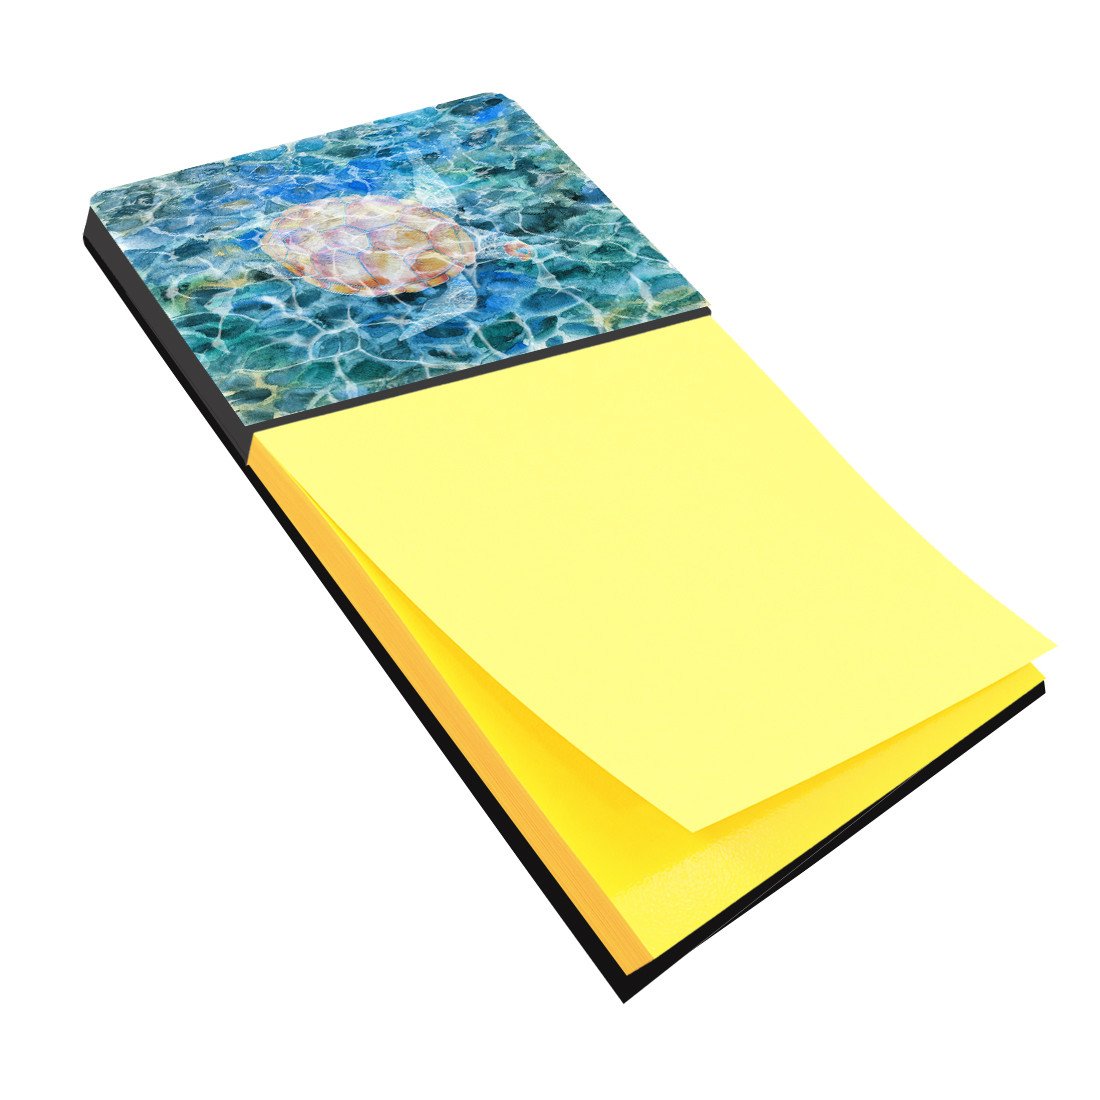 Sea Turtle Under water Sticky Note Holder BB5363SN by Caroline's Treasures